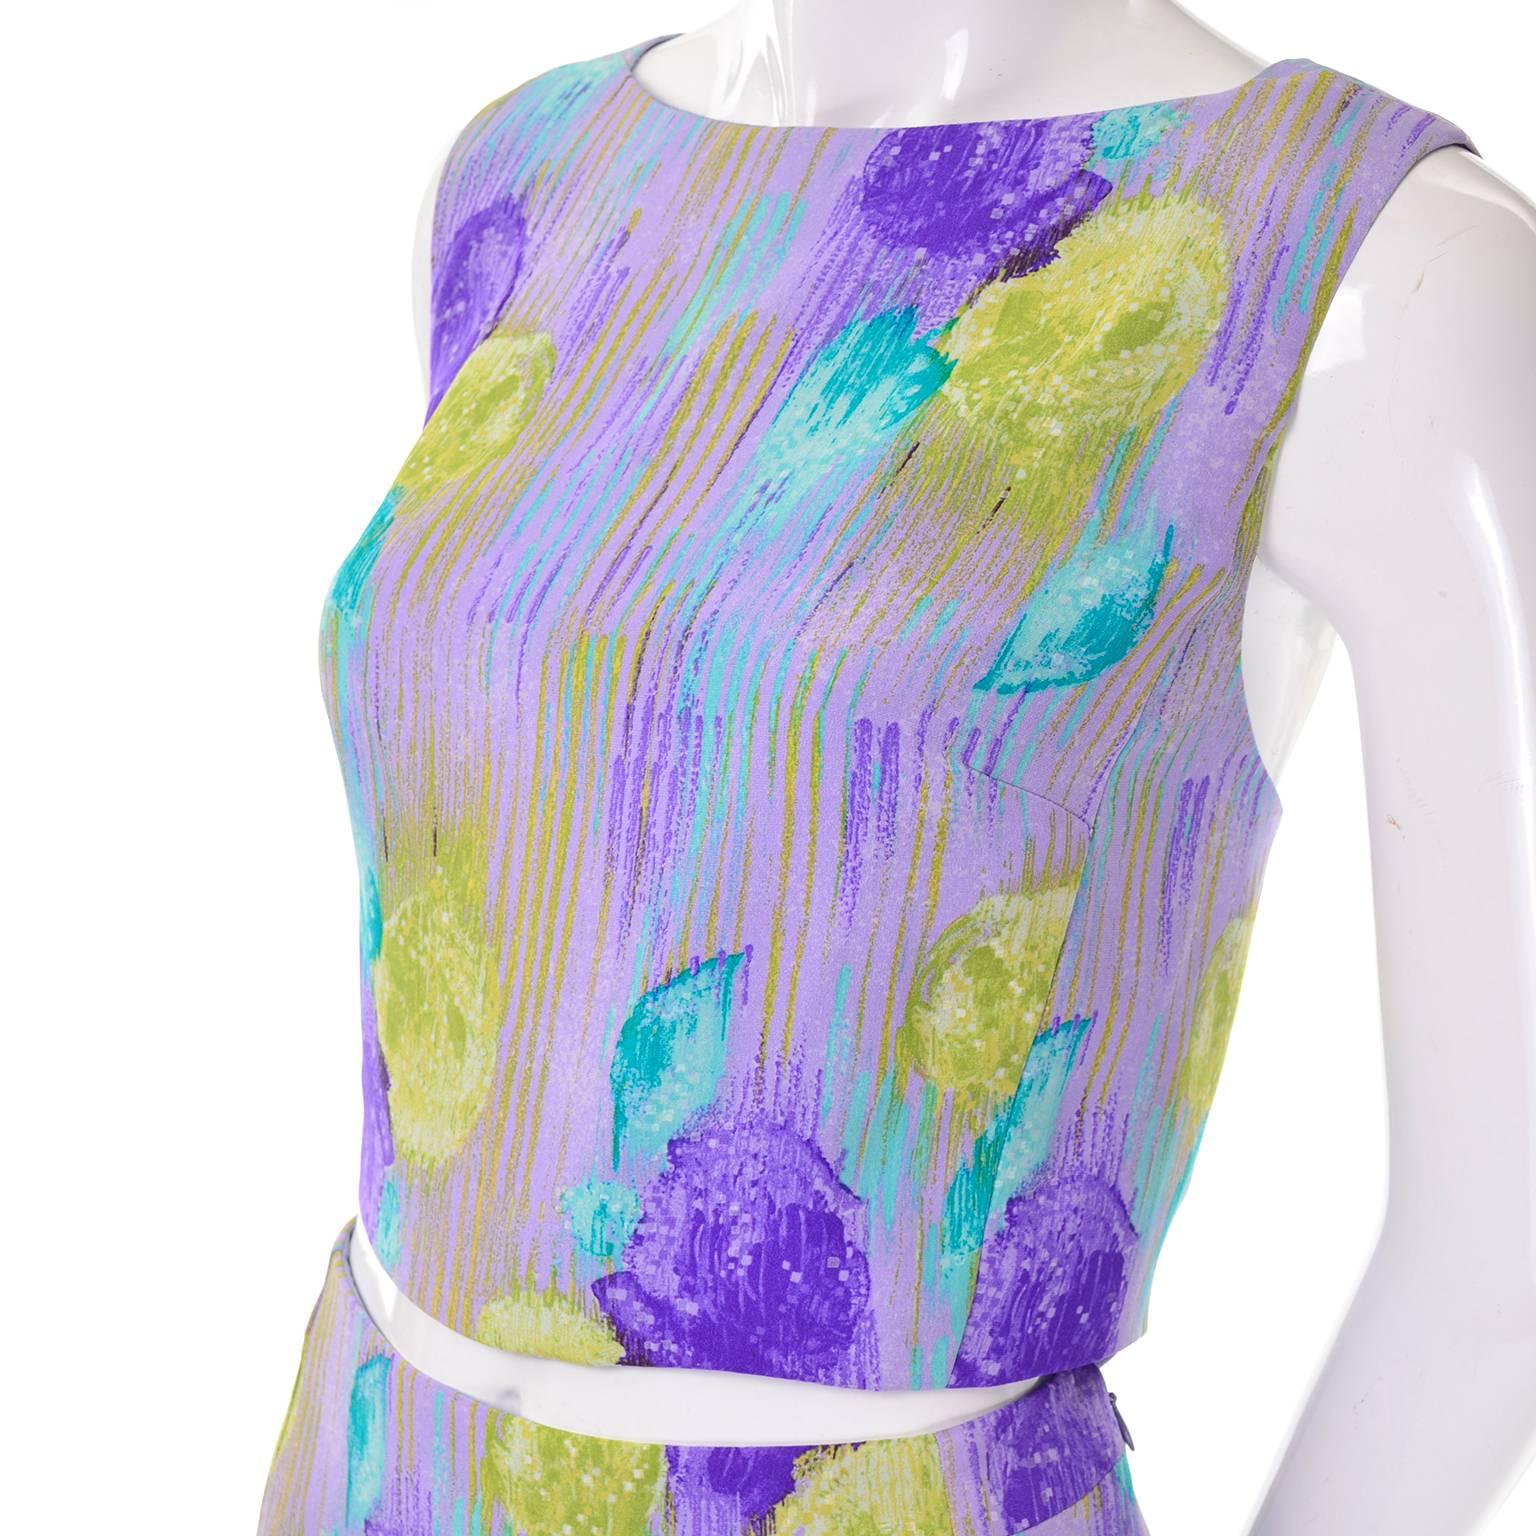 This is an outstanding 1999 deadstock Gianni Versace Couture 2 piece dress with a silk crop top and skirt in an abstract floral design. This gorgeous ensemble has its original tags and was never worn. The fabric is a pale purple base silk with